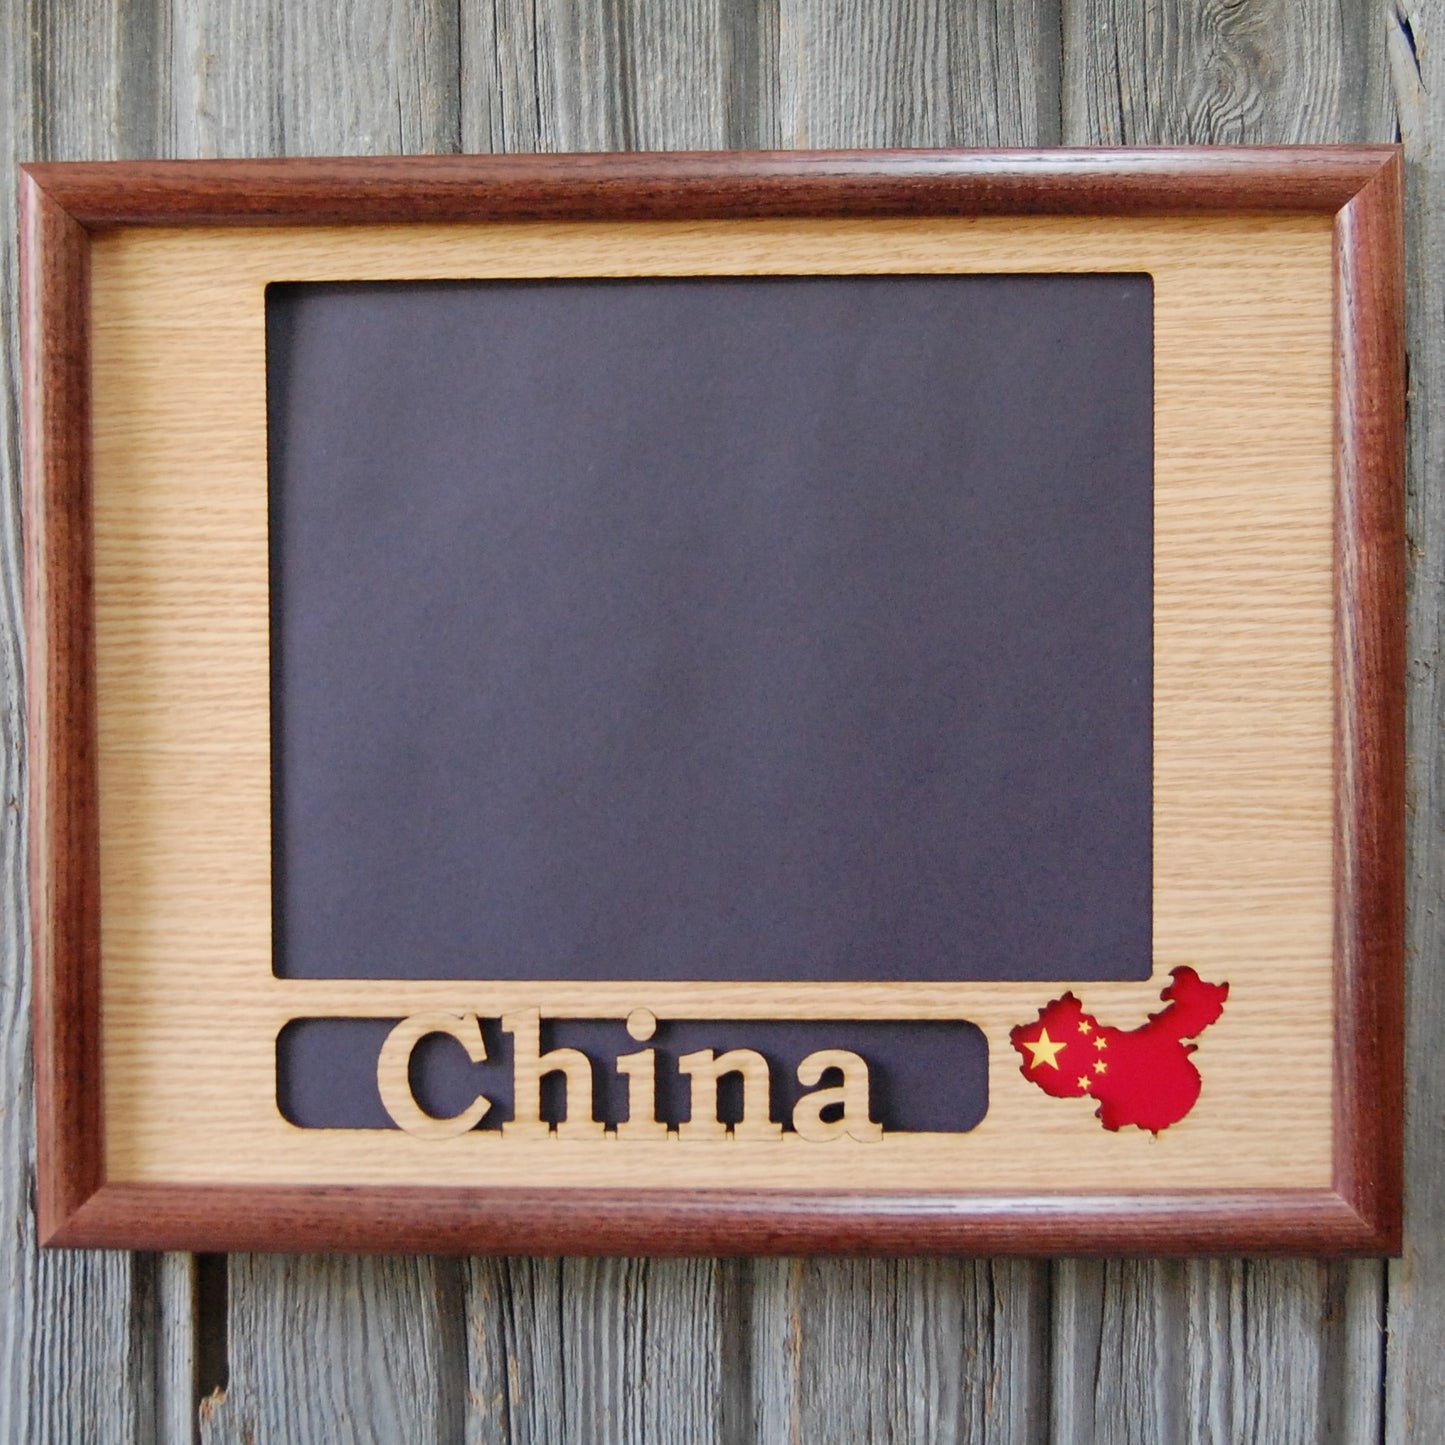 Travel Picture Frame - 11x14 Frame Hold 8x10 Photo or 8 Photos of Various Size